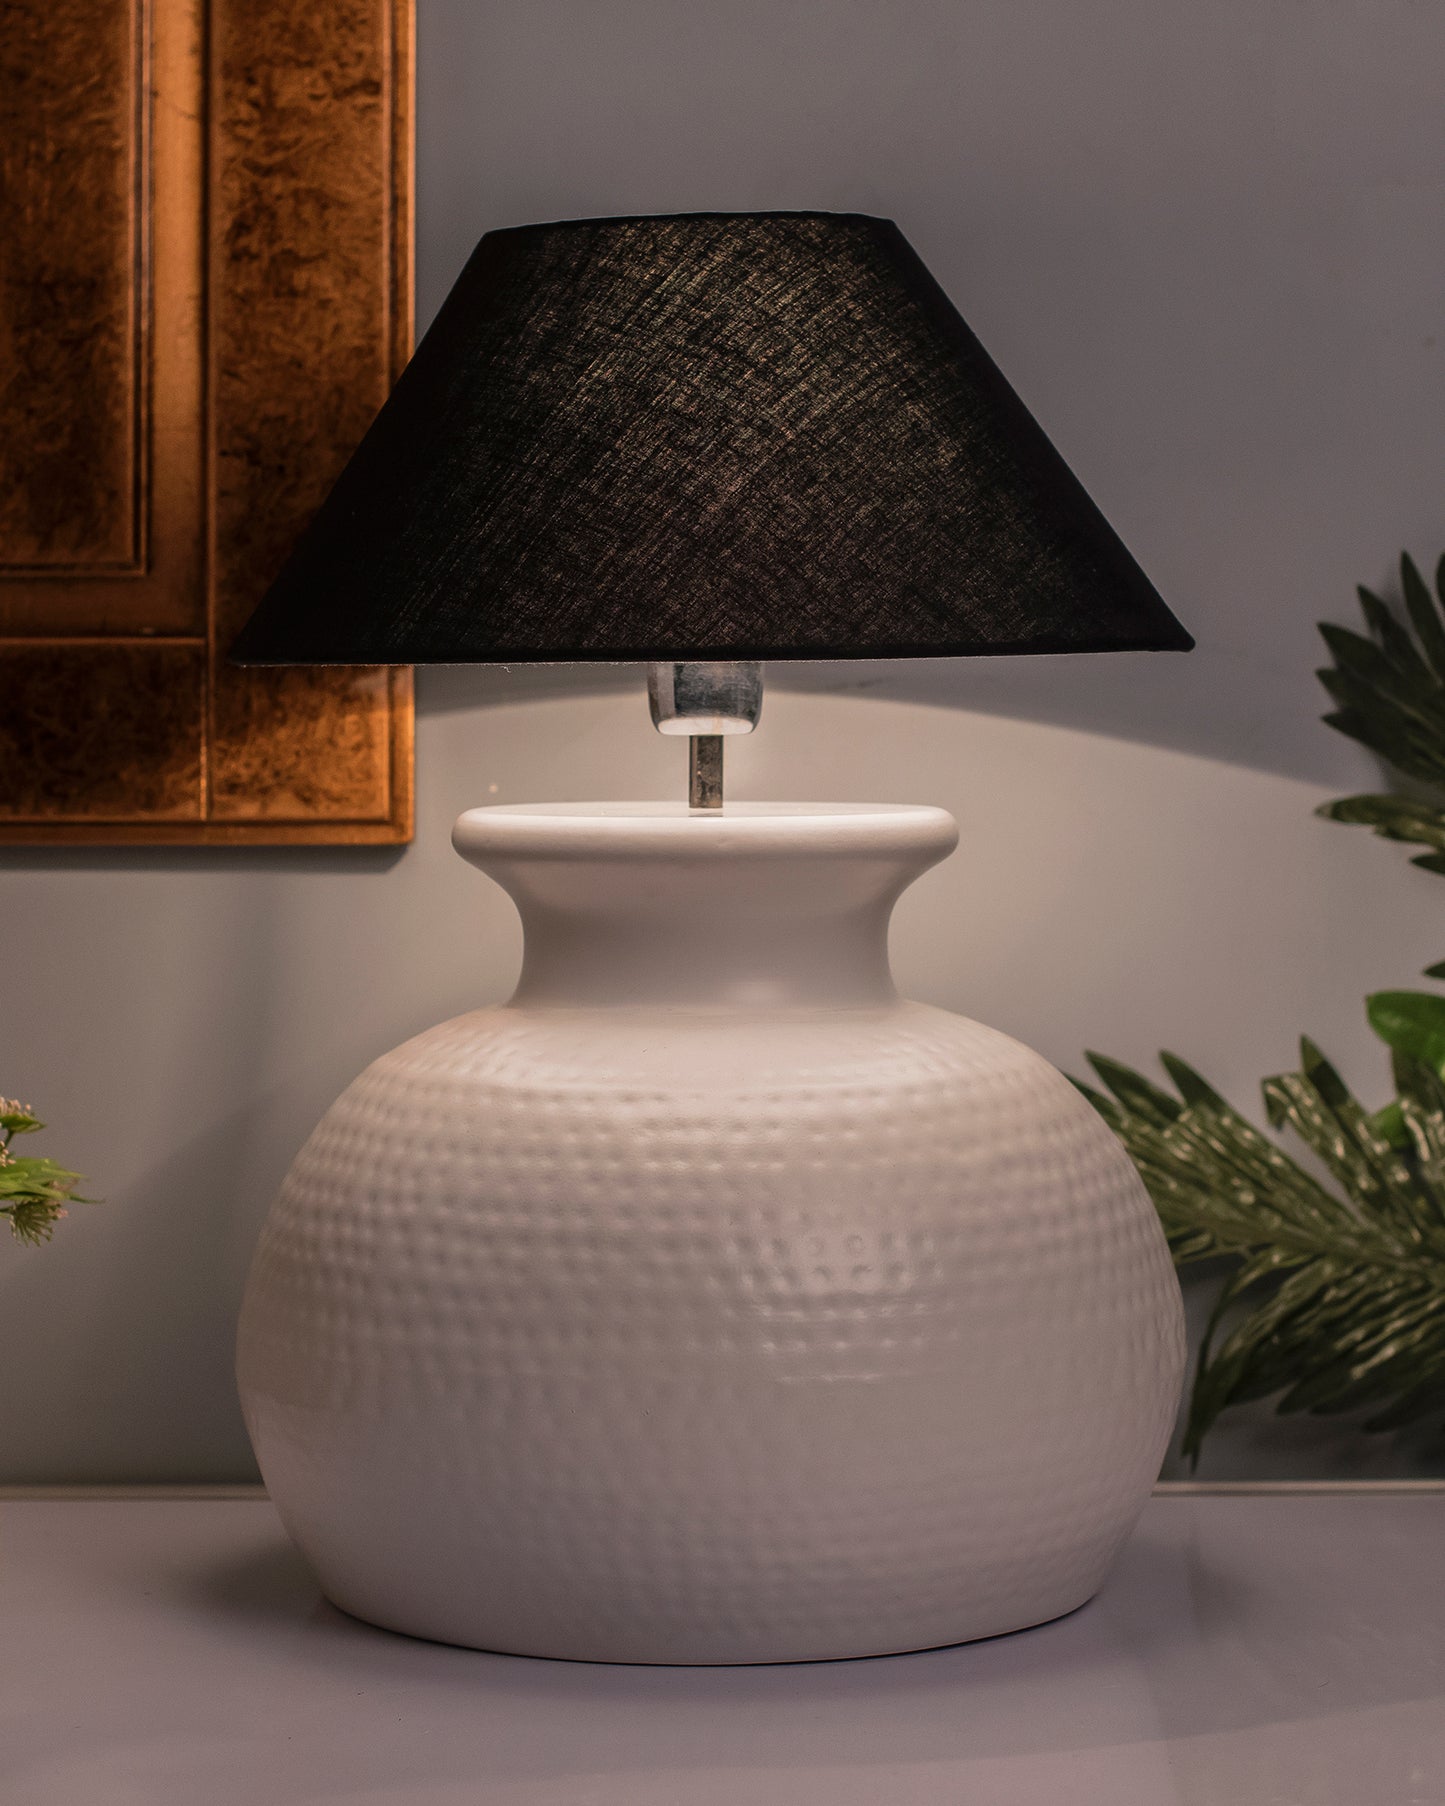 Matt White Hammered Pitcher Table Lamp with Cone Shade